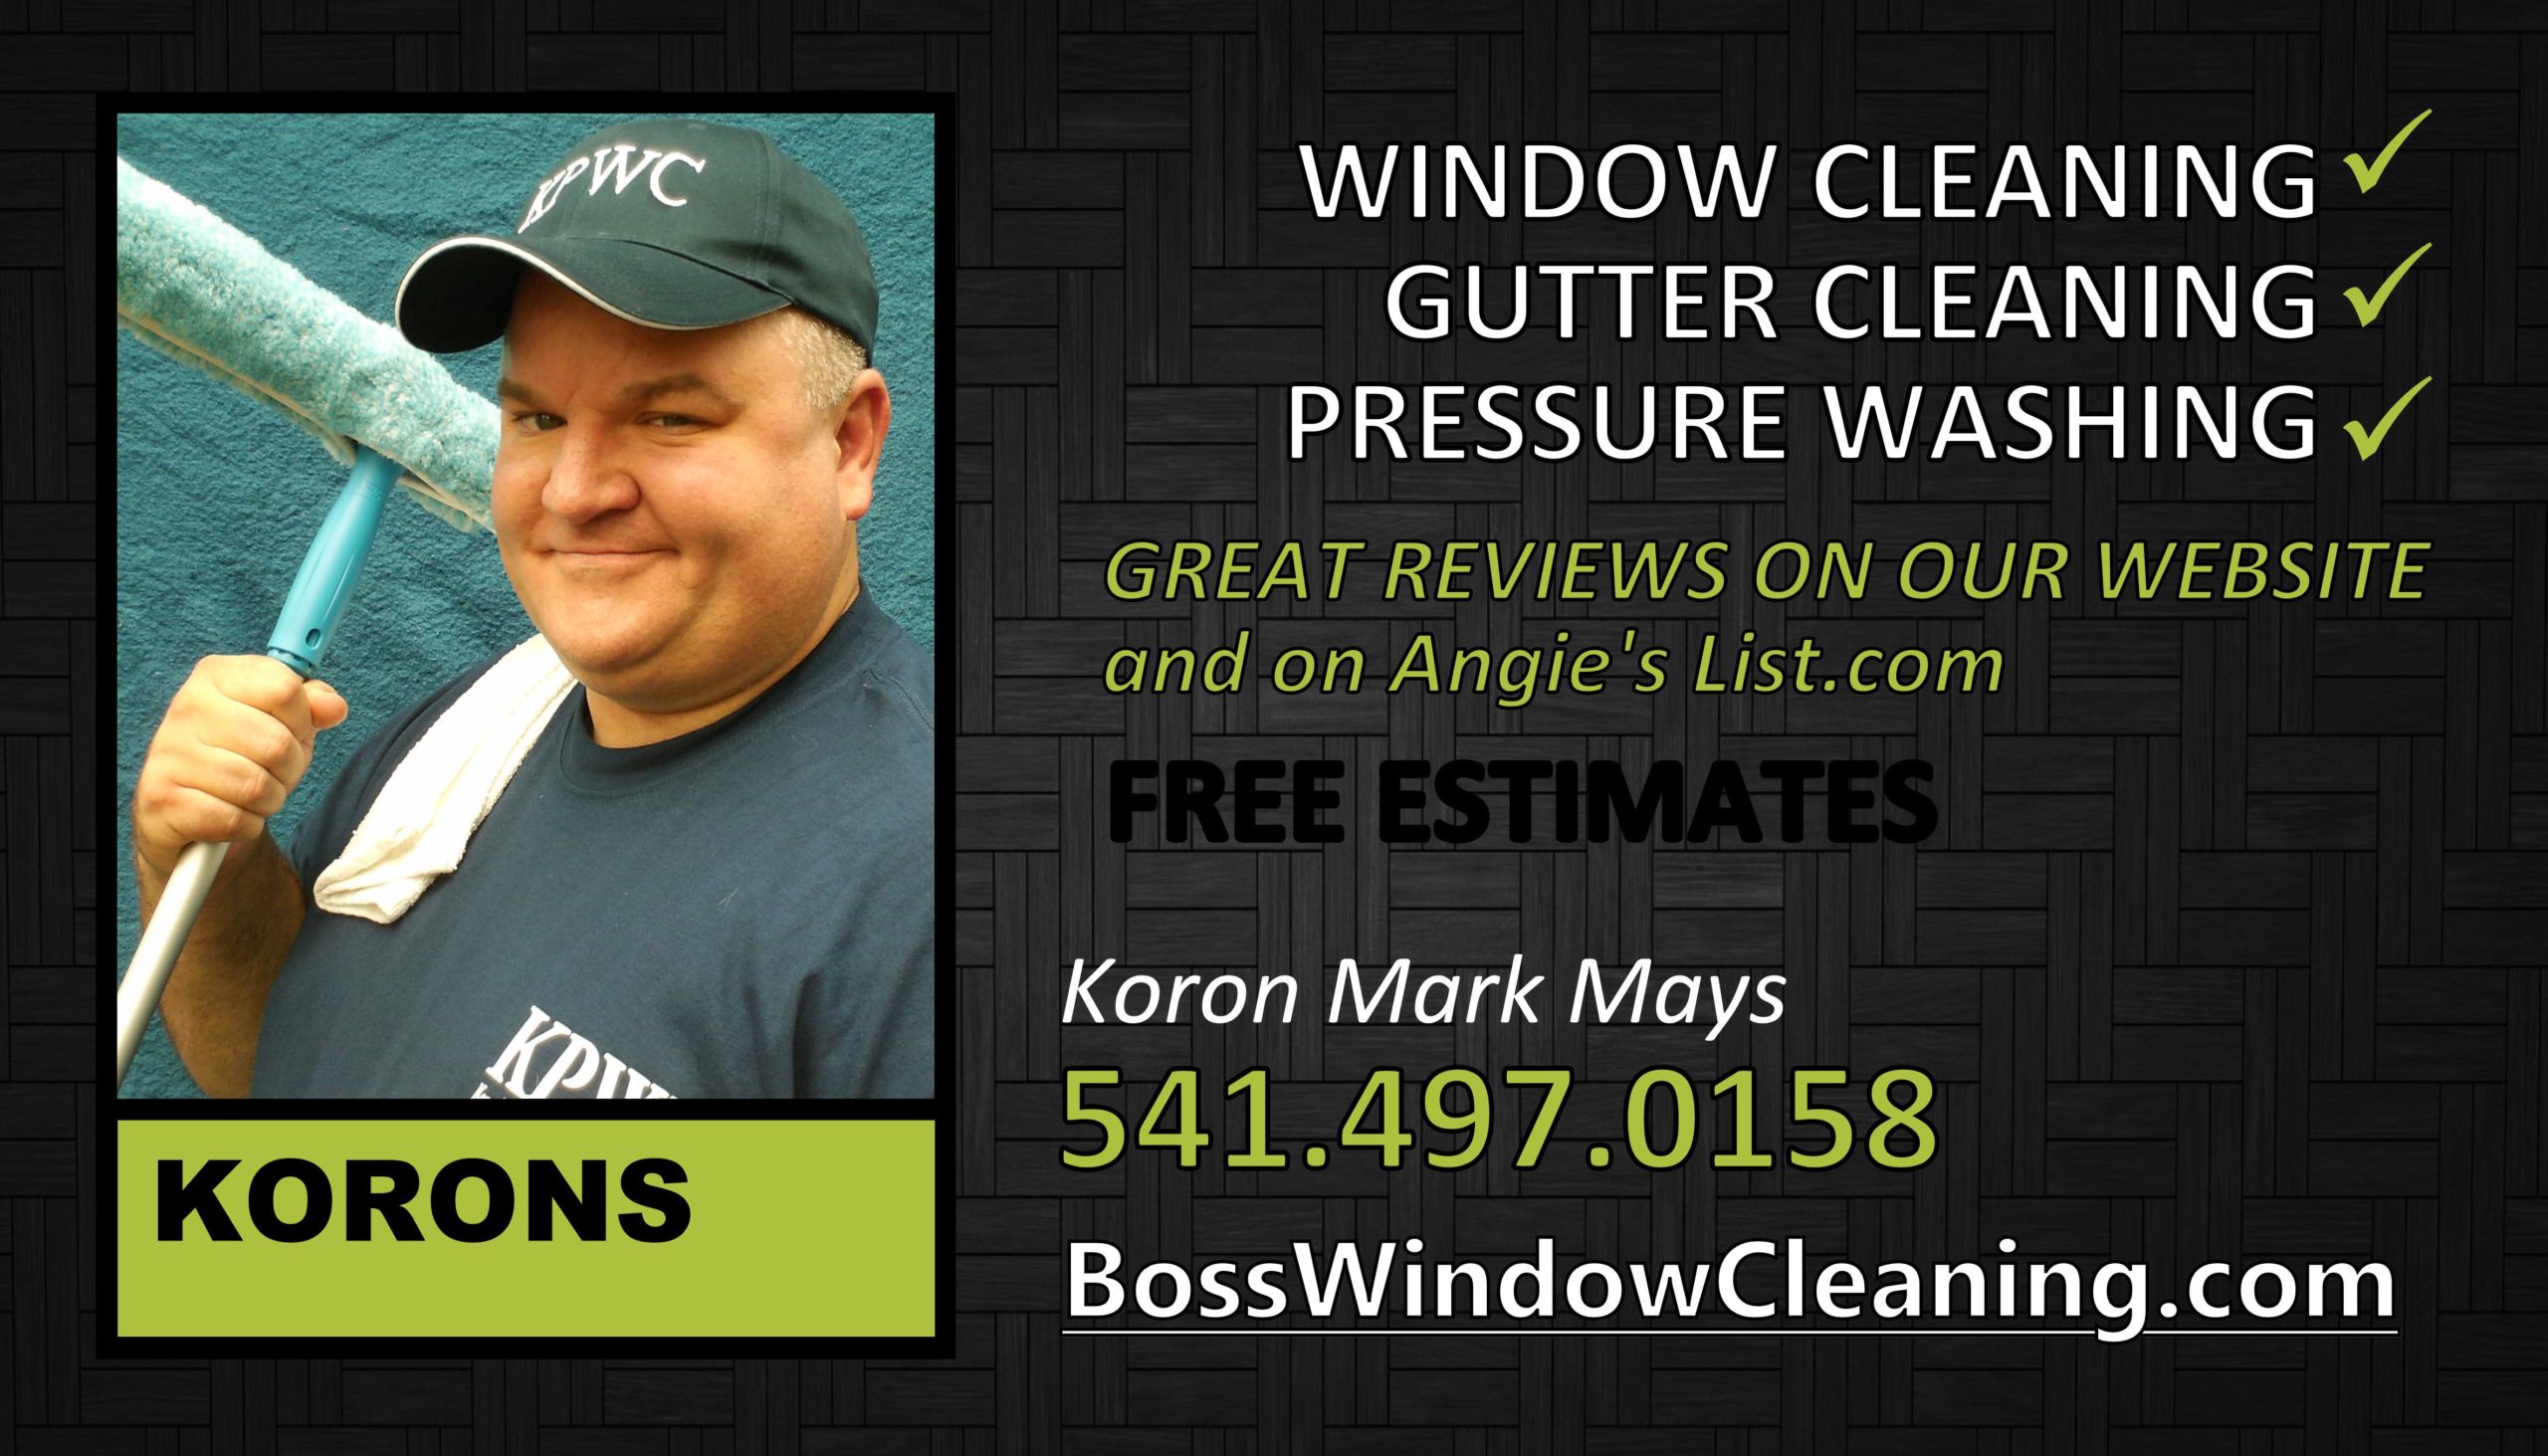 window cleaner business cards 2